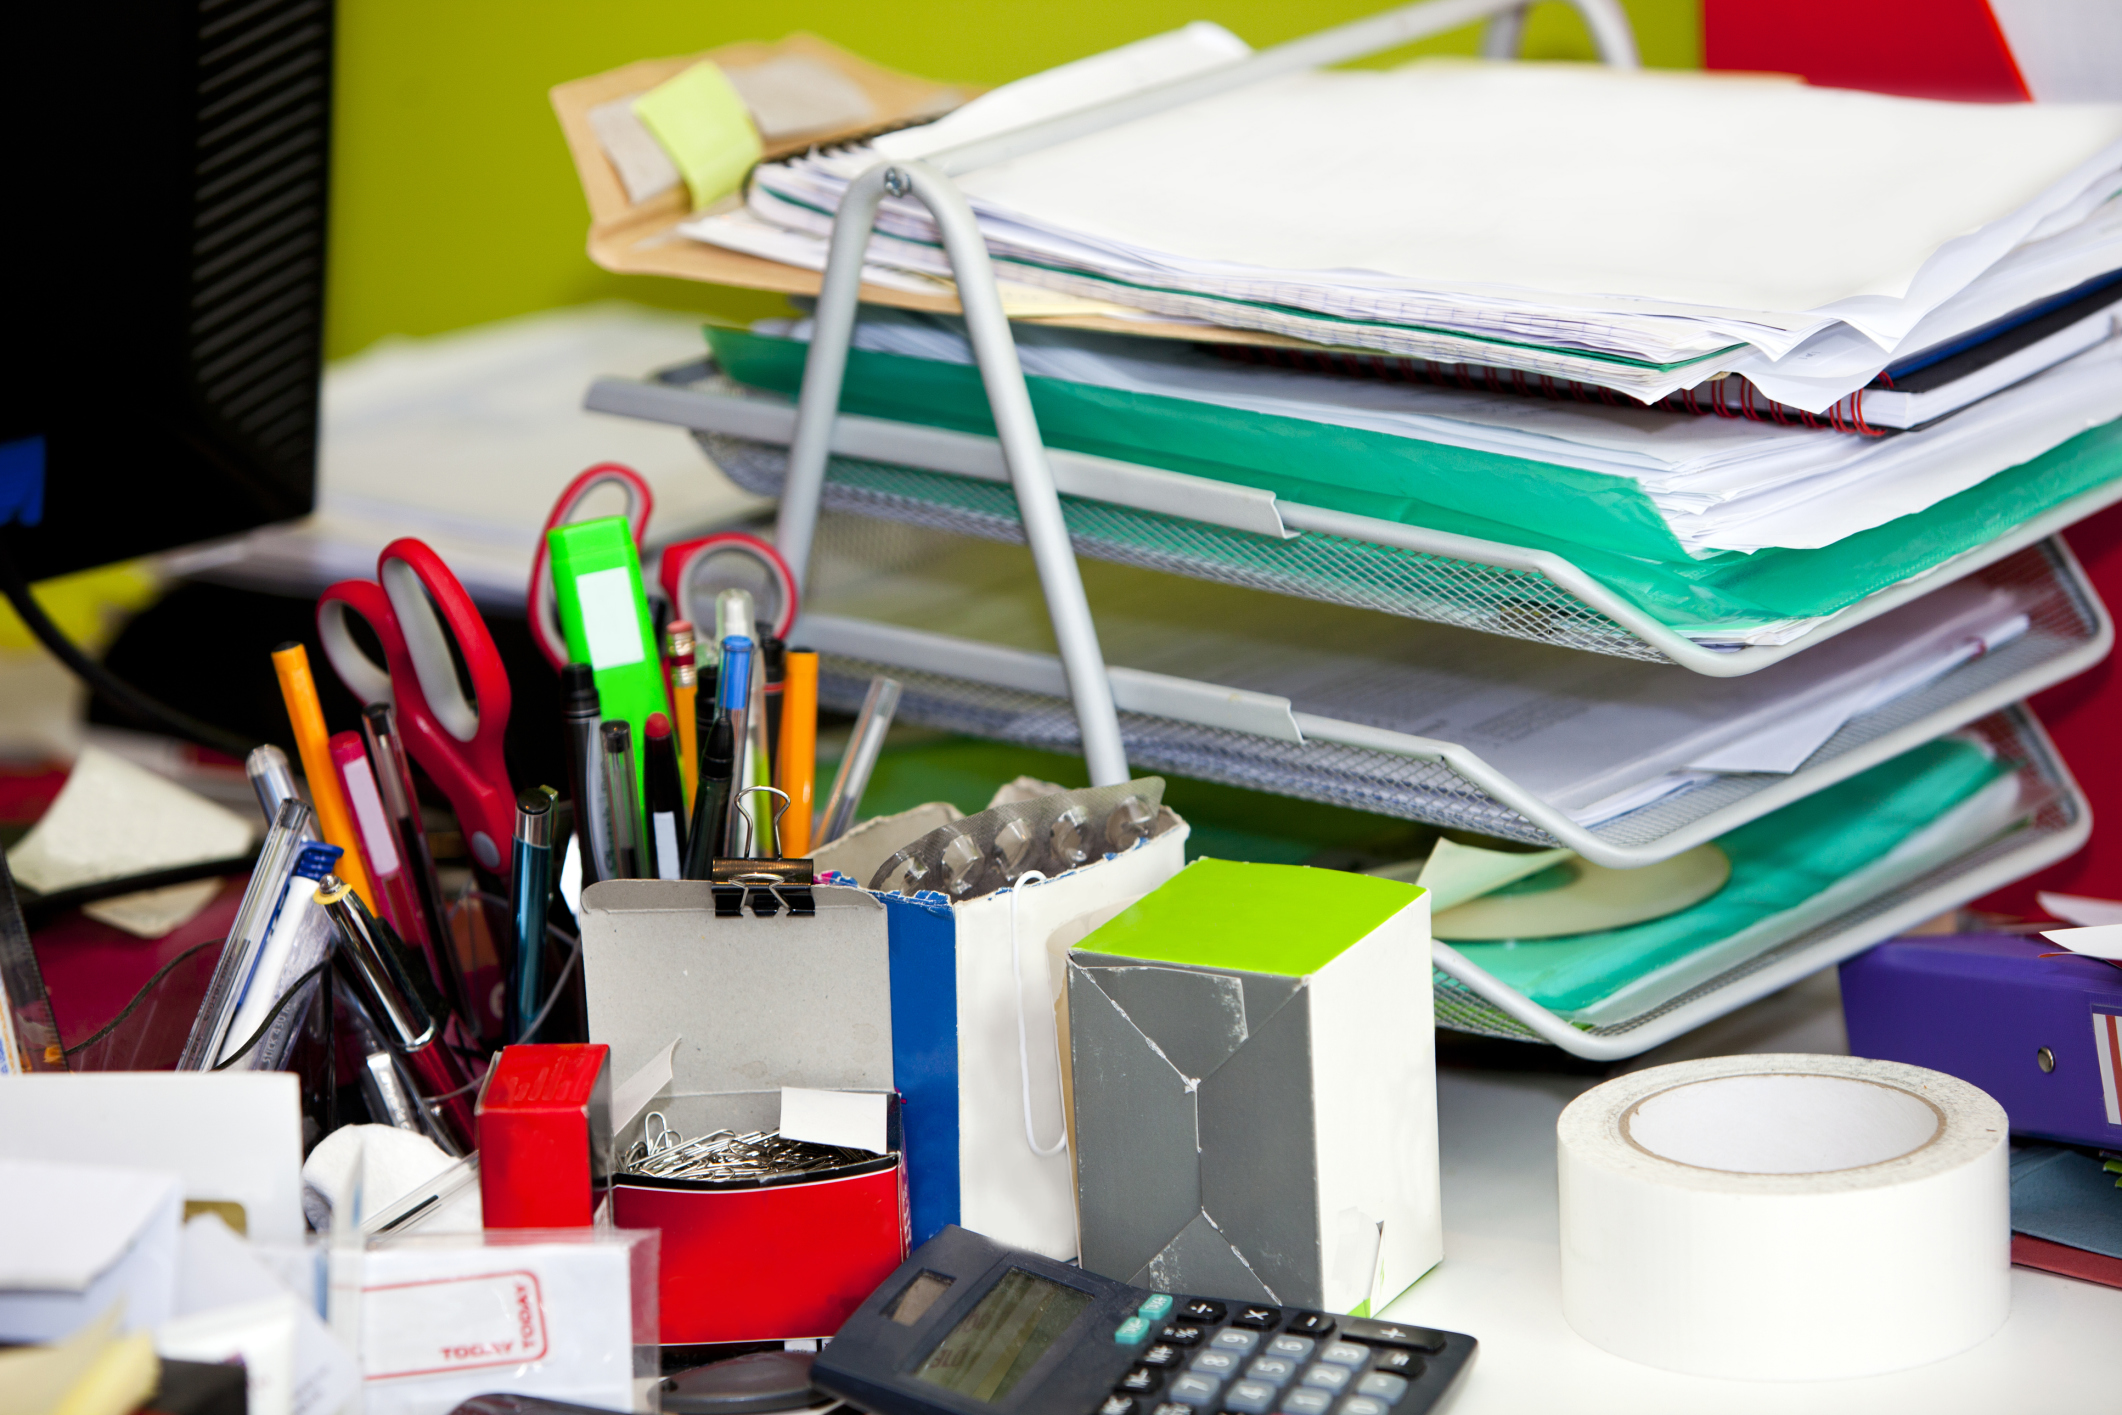 6 steps to spring clean your workspace and boost productivity